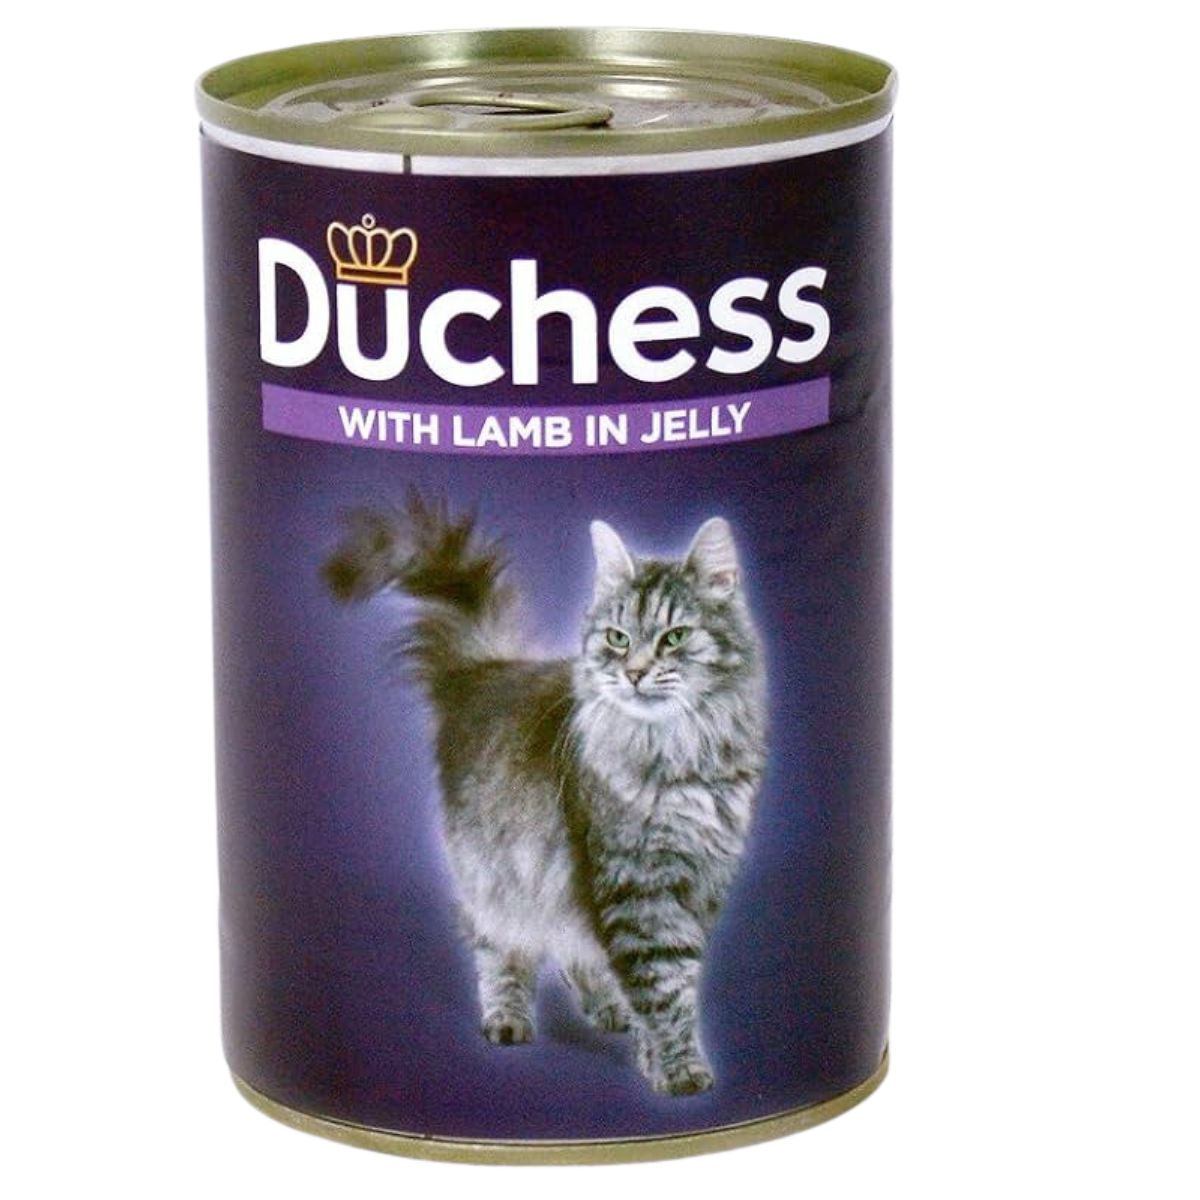 A can of Duchess - with Lamb in Jelly - 400g.